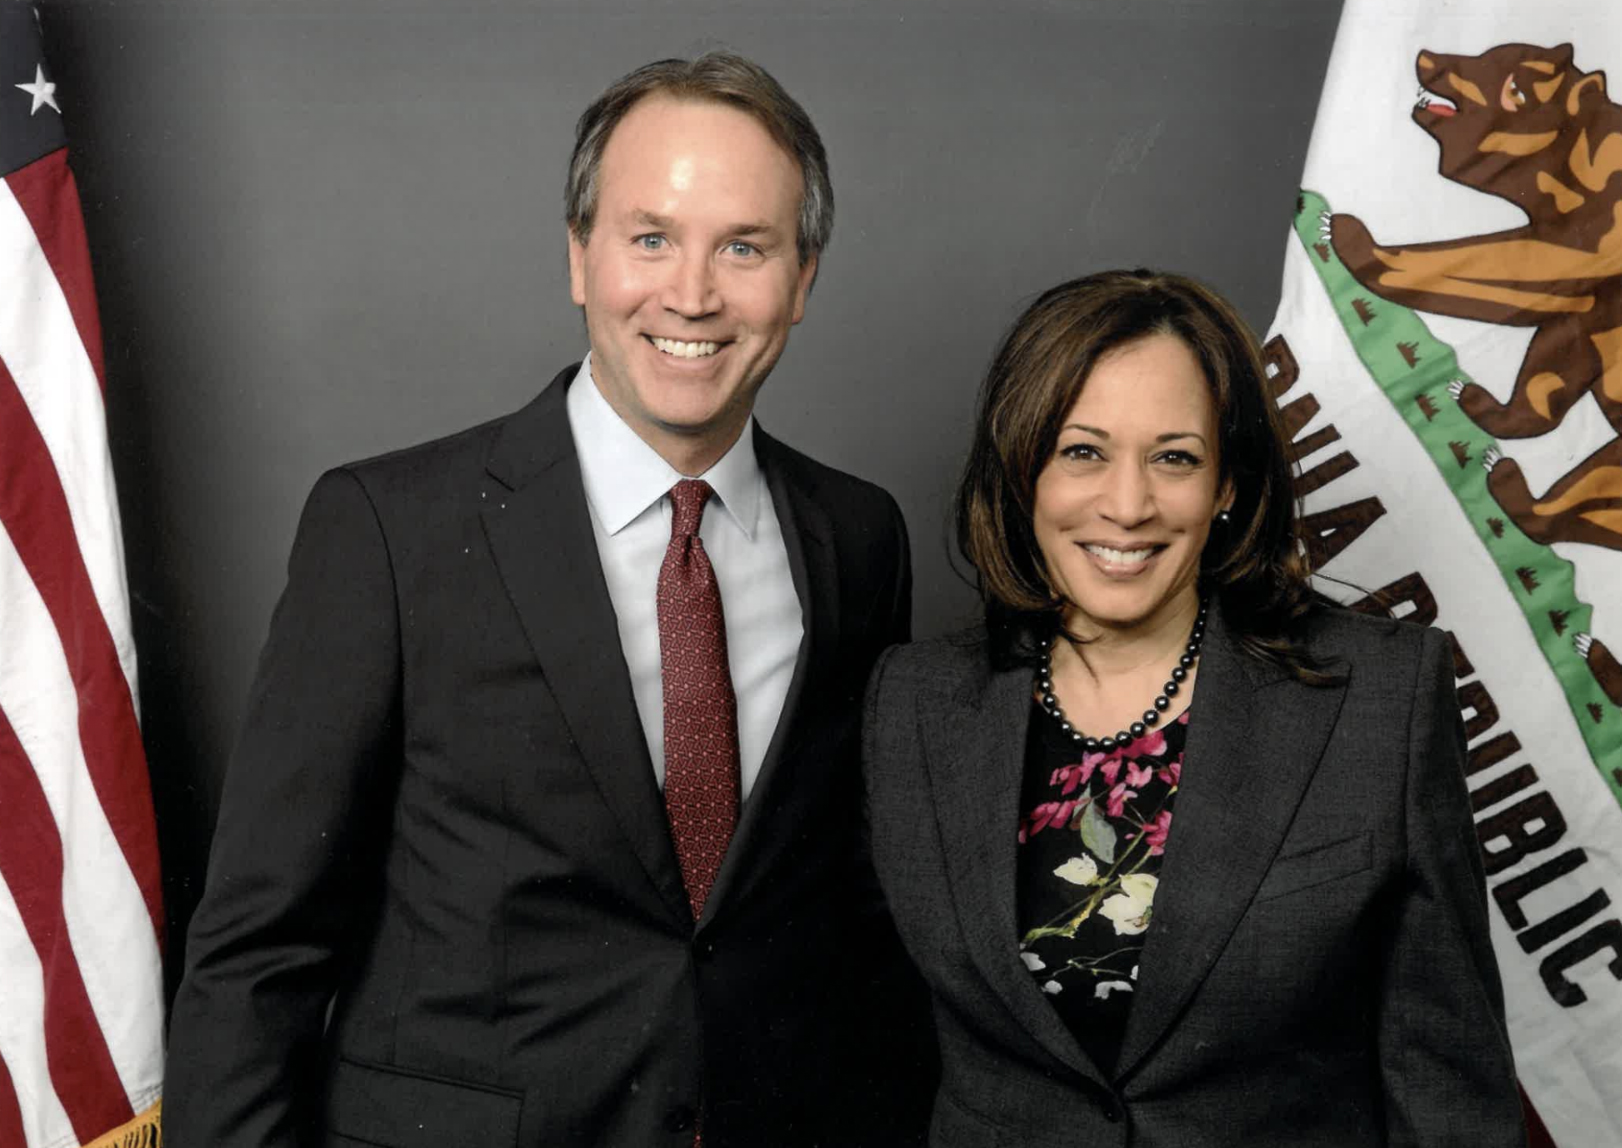 Two people in suits stand smiling before US and California flags.